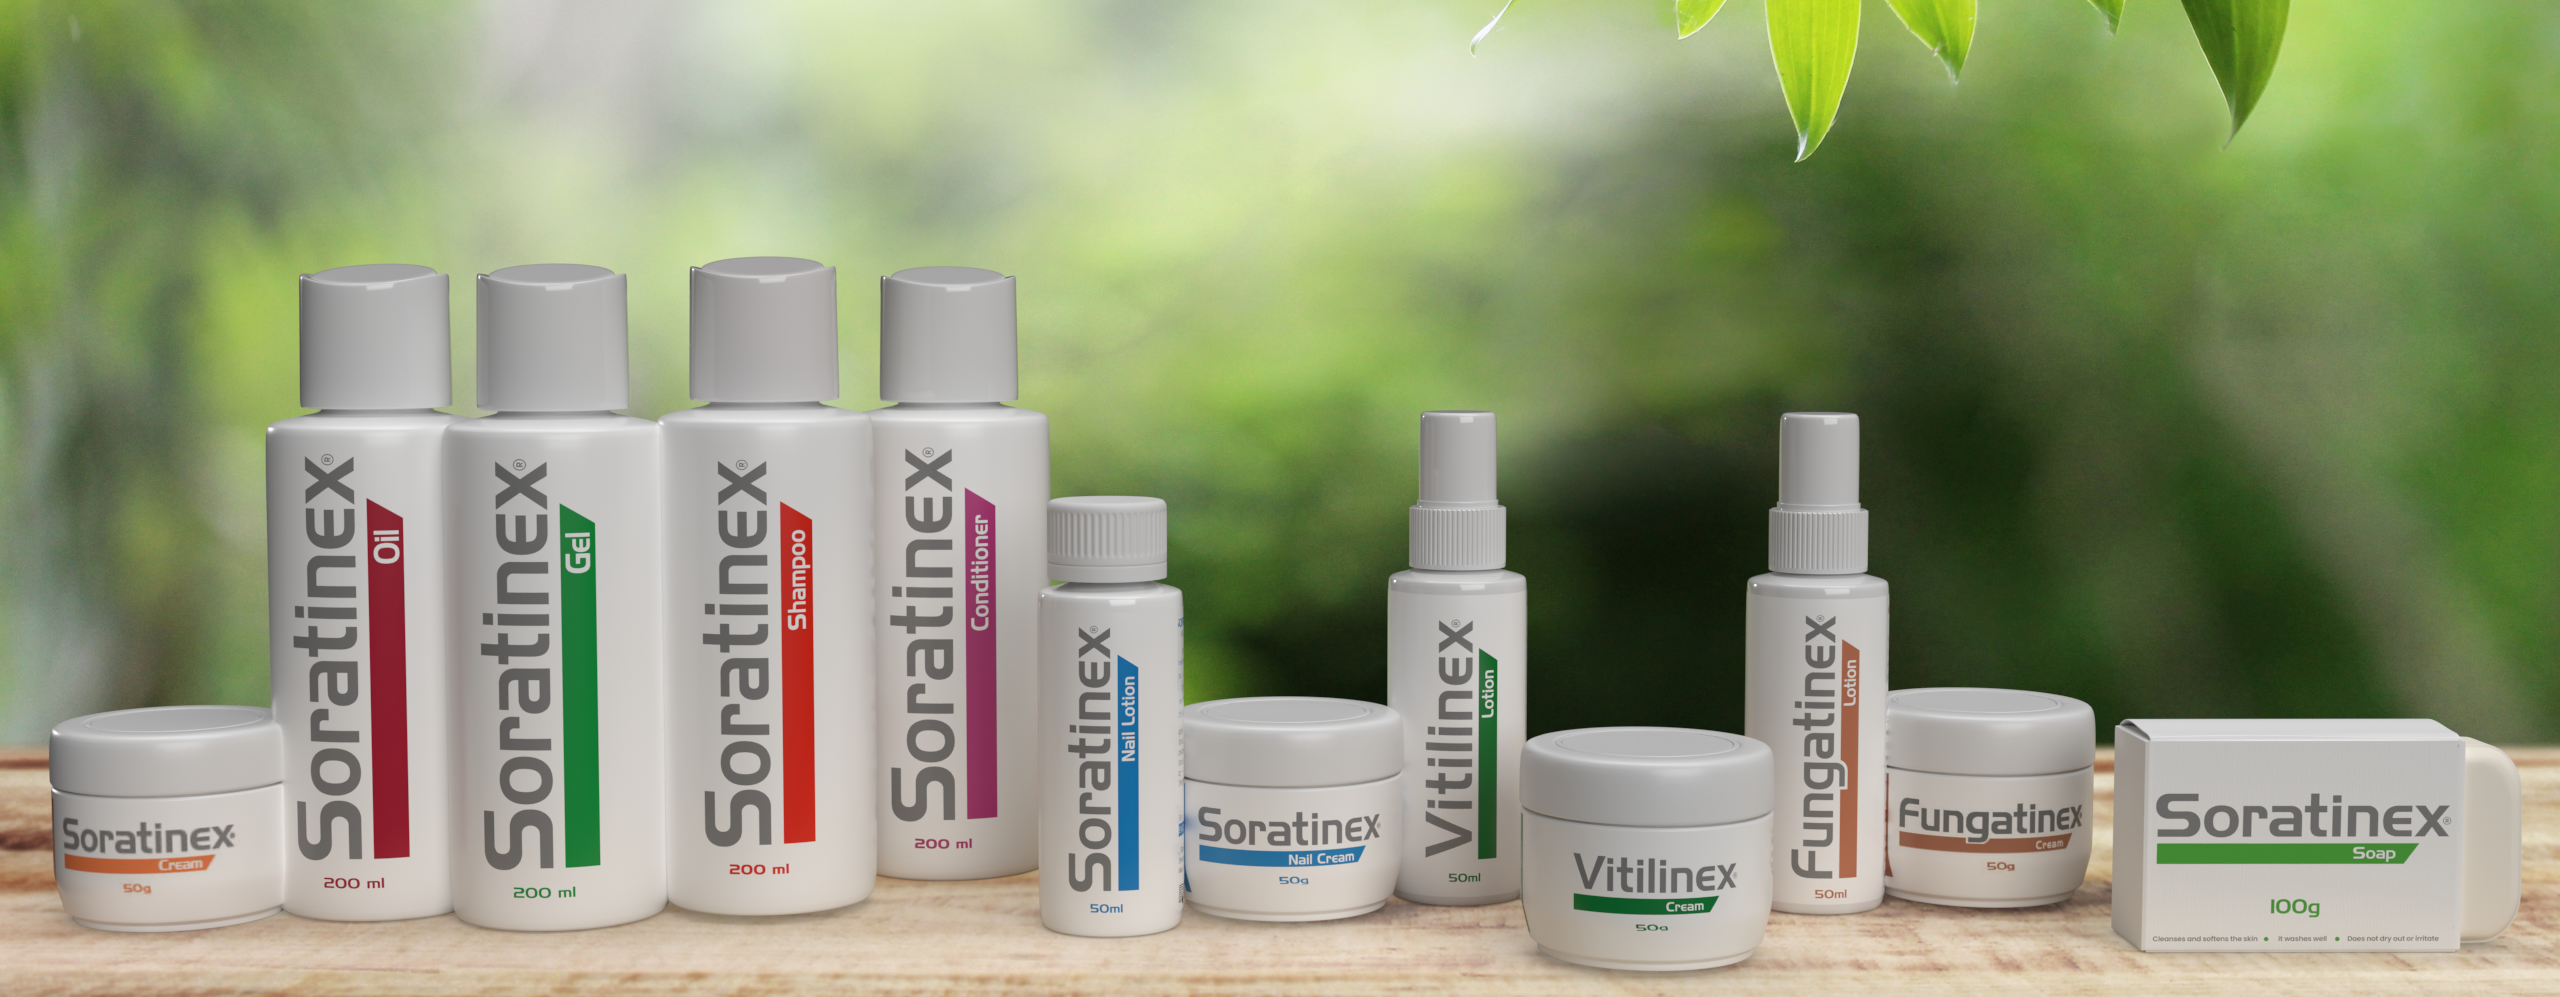 soratinex all products